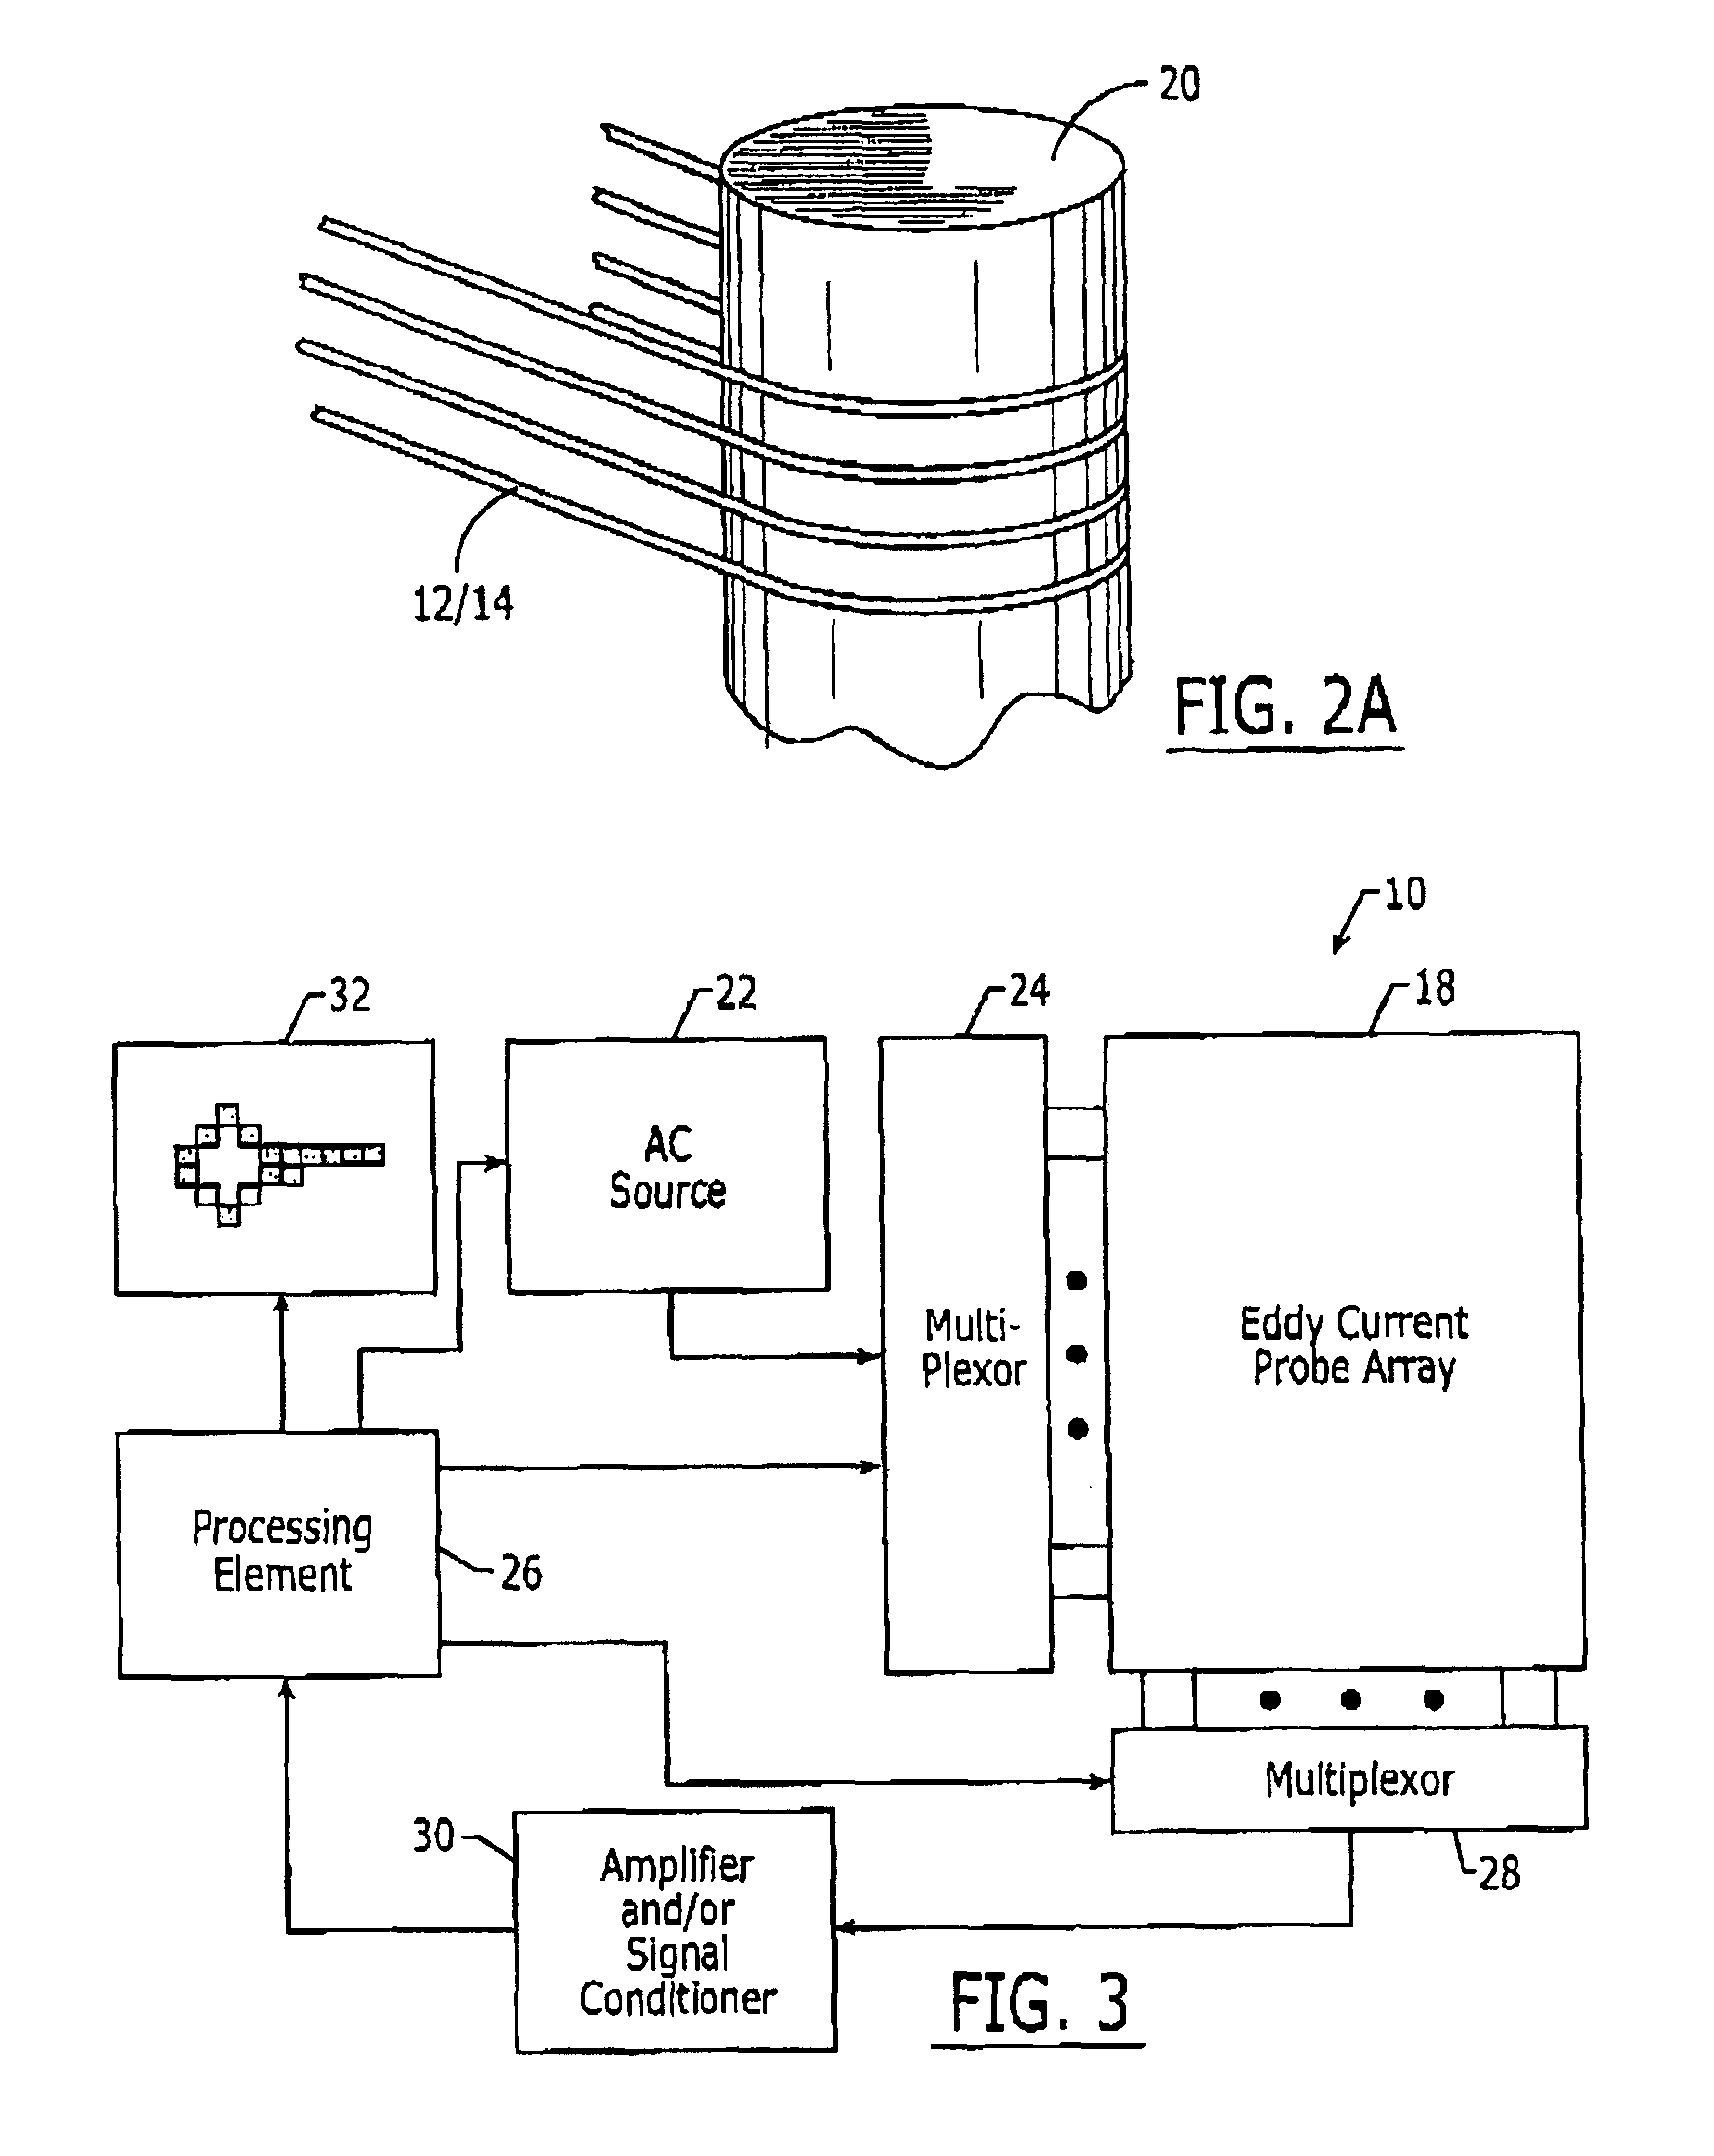 Eddy current probe having sensing elements defined by first and second elongated coils and an associated inspection method